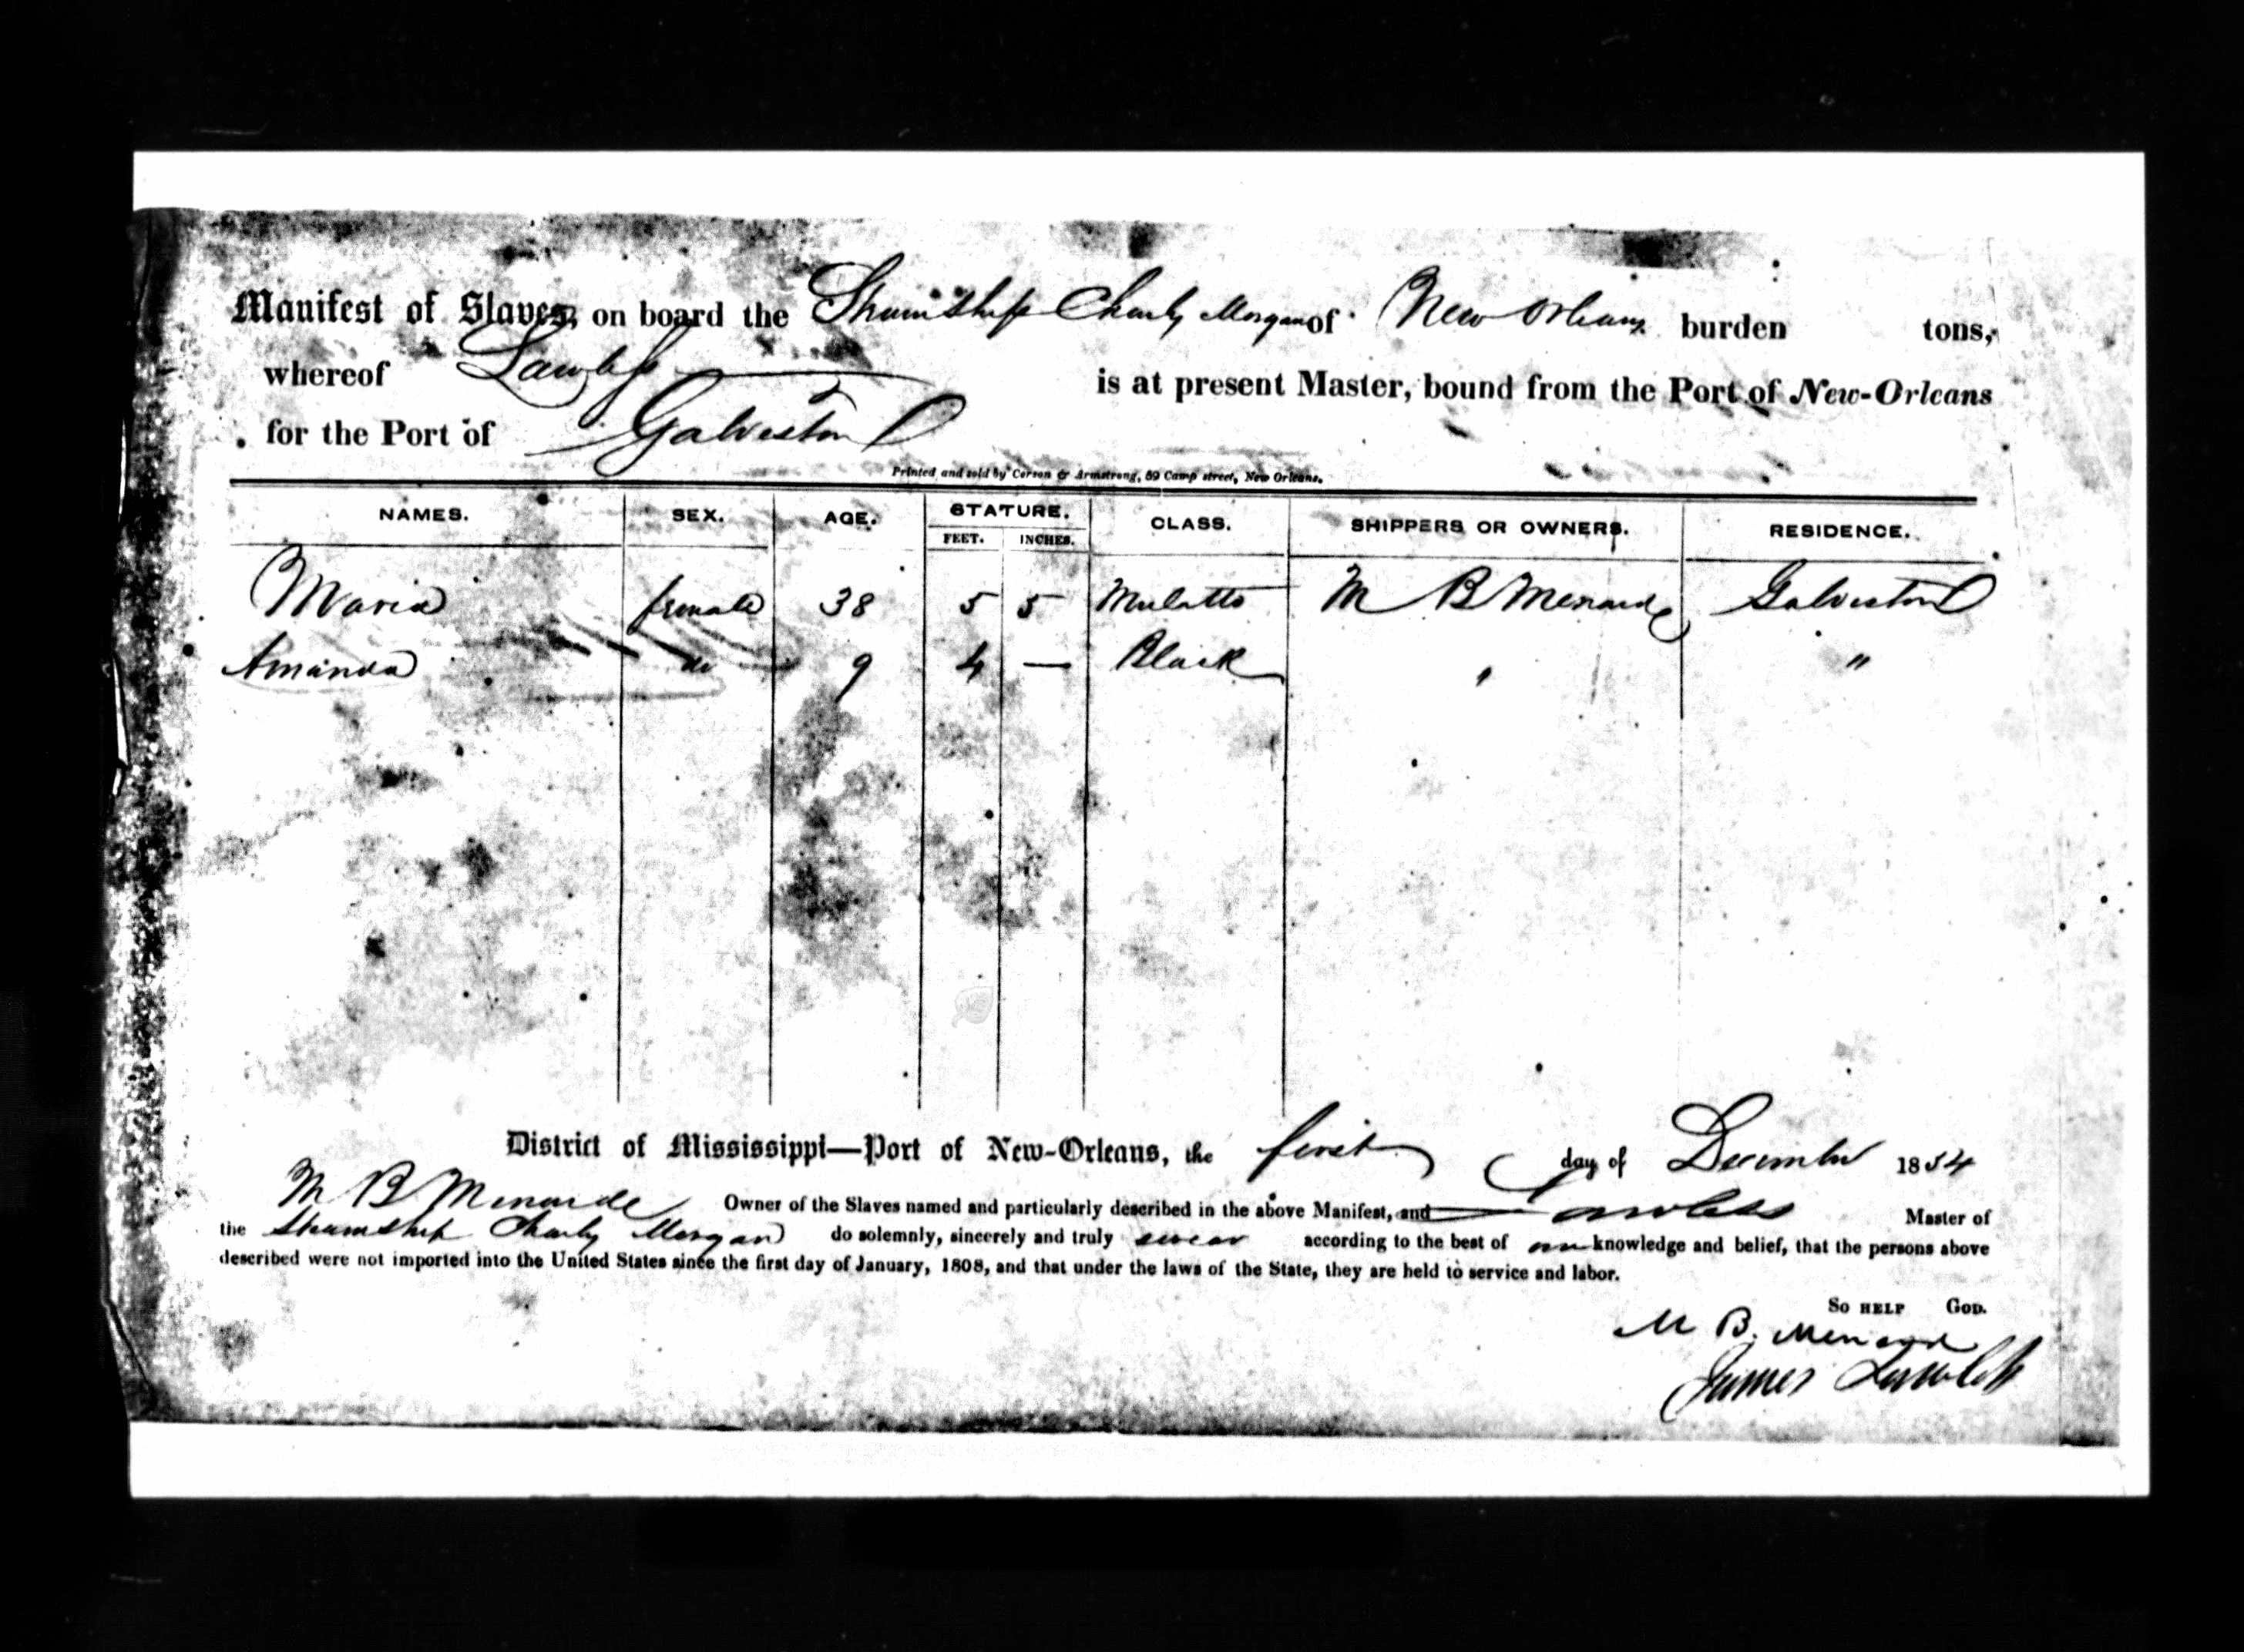 Ship manifest for the Steamship Charly Morgan showing the transportation of two enslaved people dated December 1, 1834.